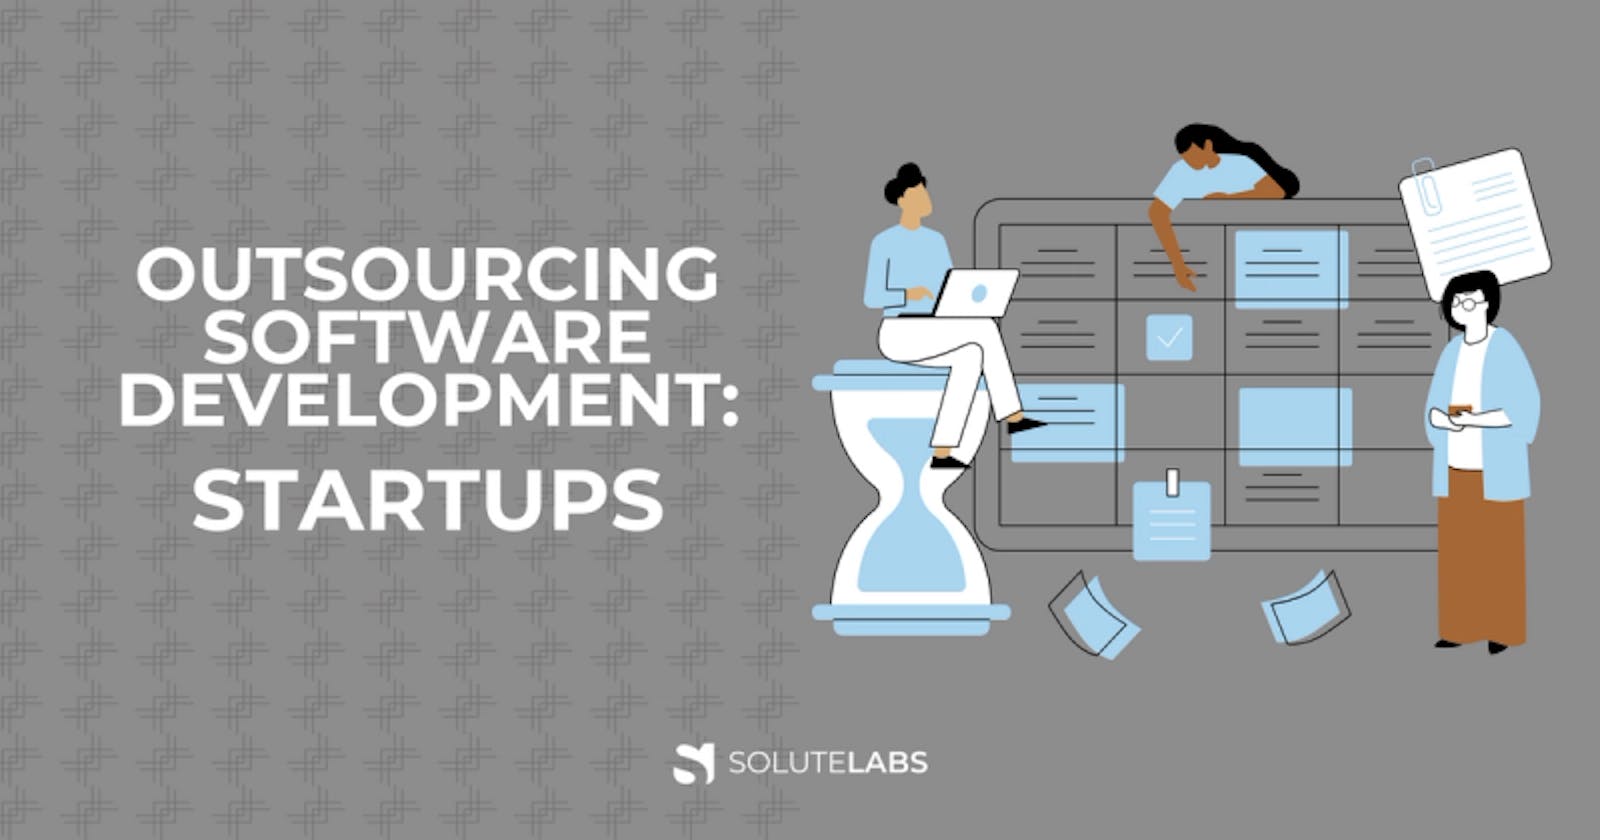 Should a Startup Outsource Software Development